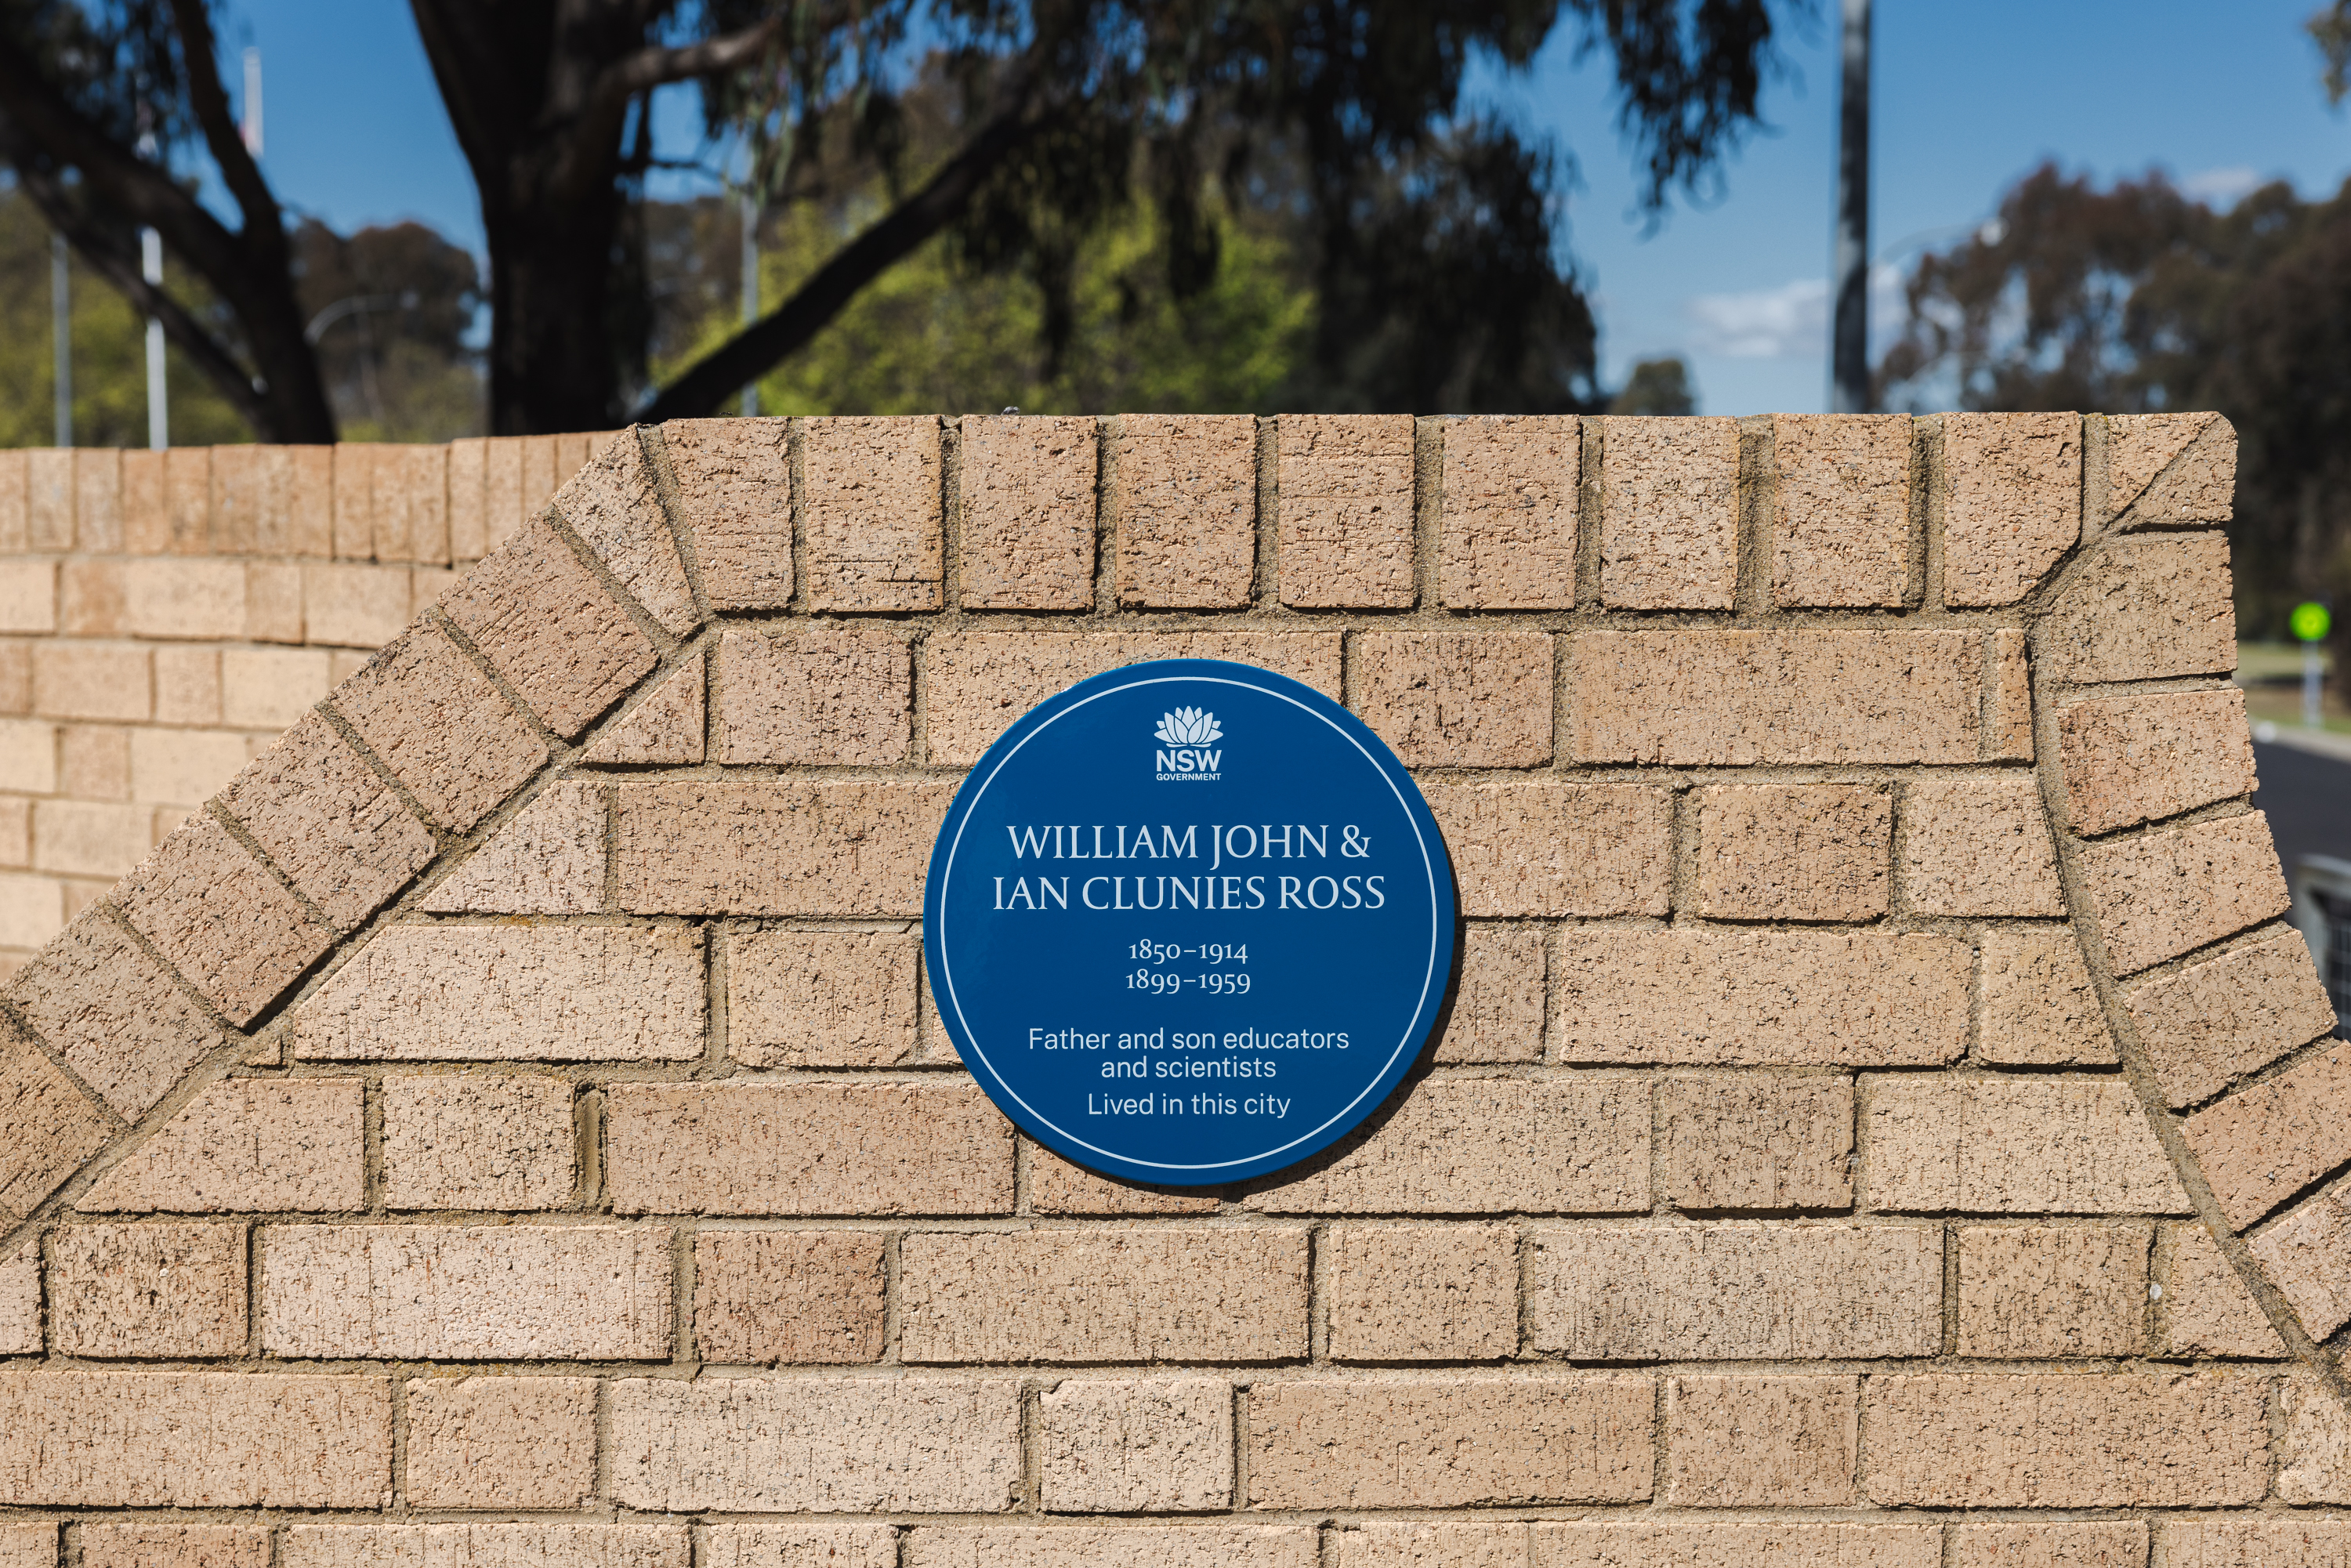 Image 4 of 4 - A photo of a blue plaque on a brick wall